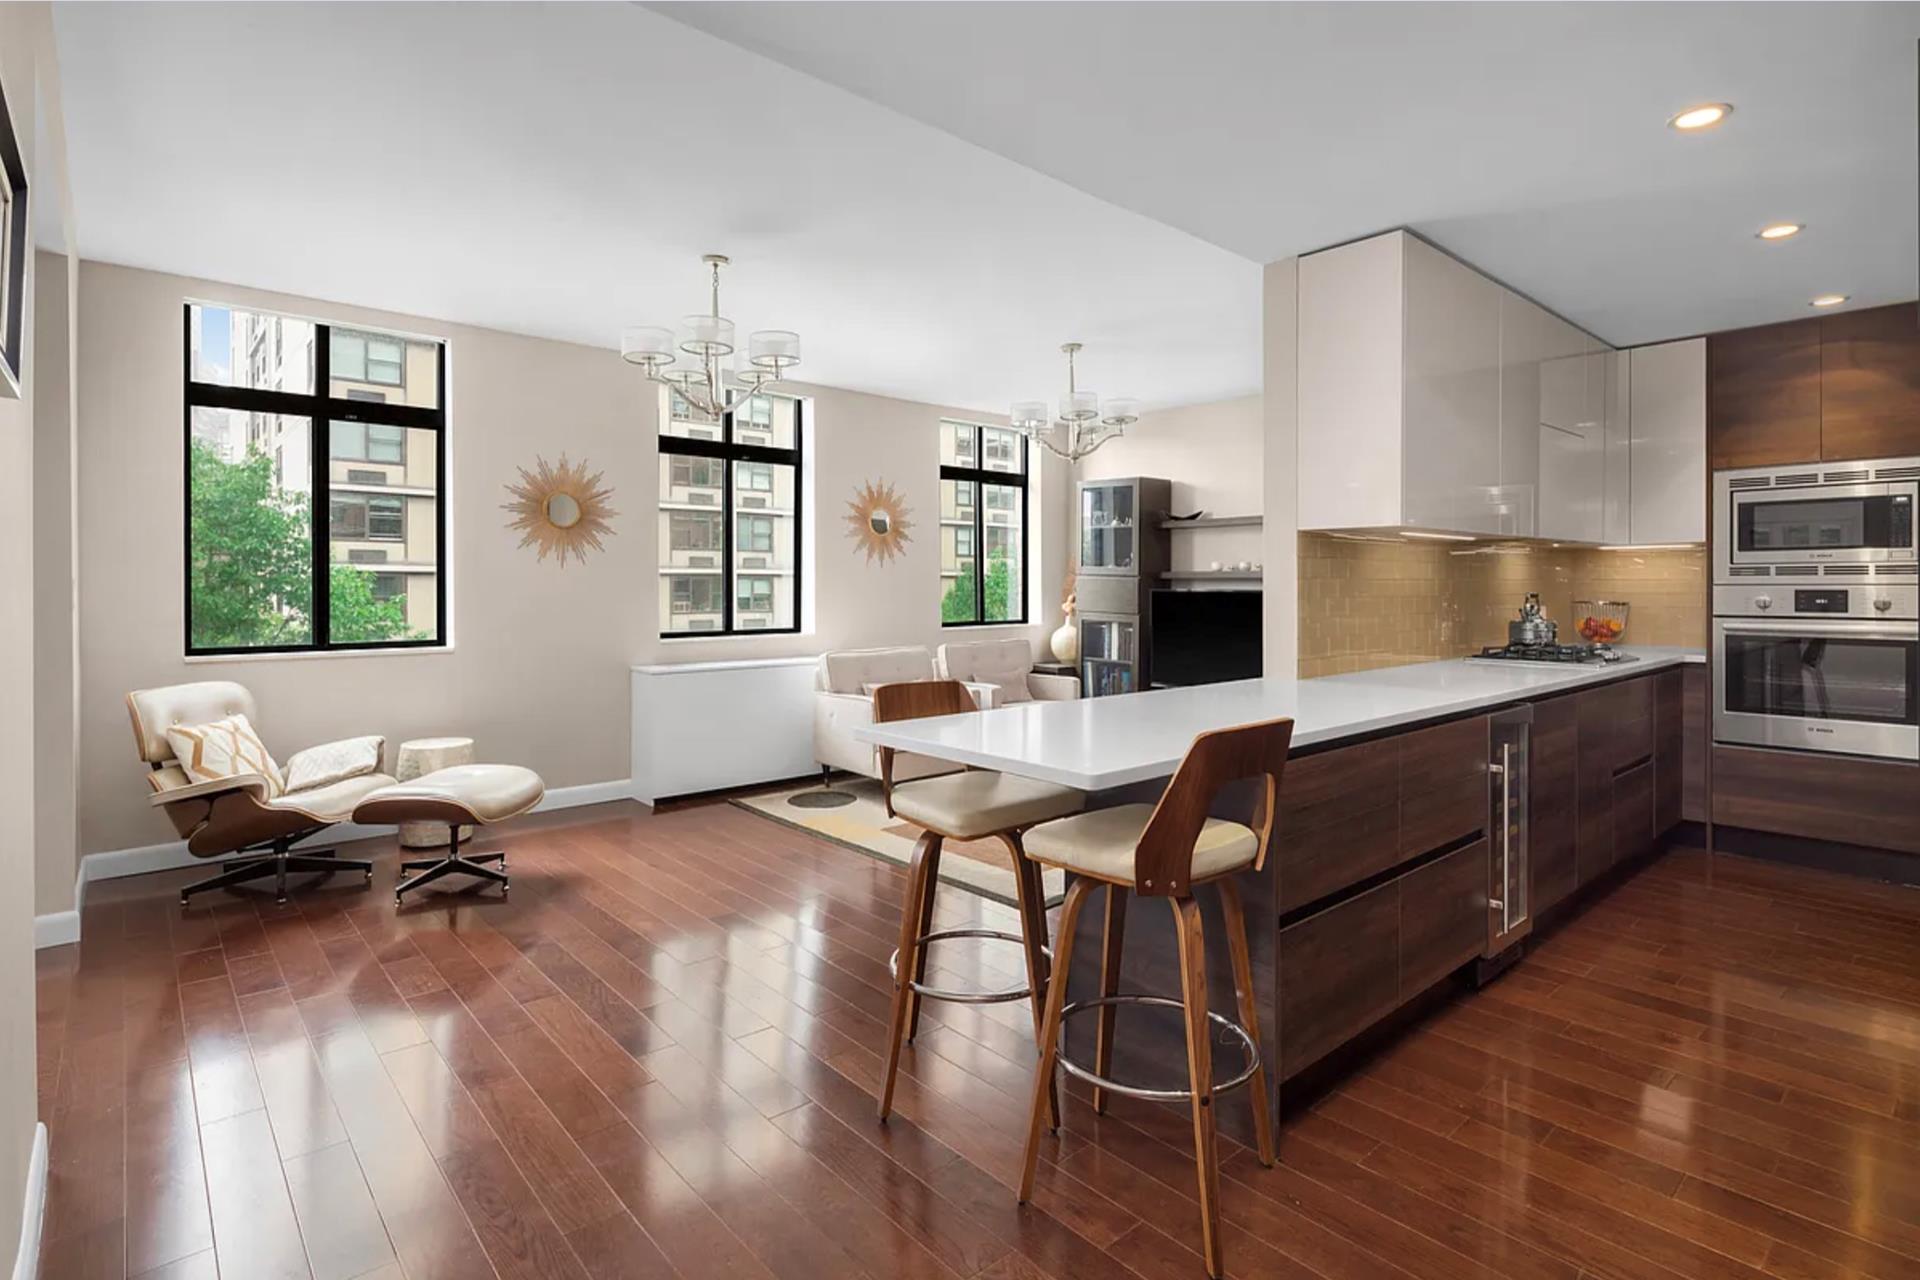 350 Albany Street 5Mn, Battery Park City, Downtown, NYC - 3 Bedrooms  
3 Bathrooms  
8 Rooms - 